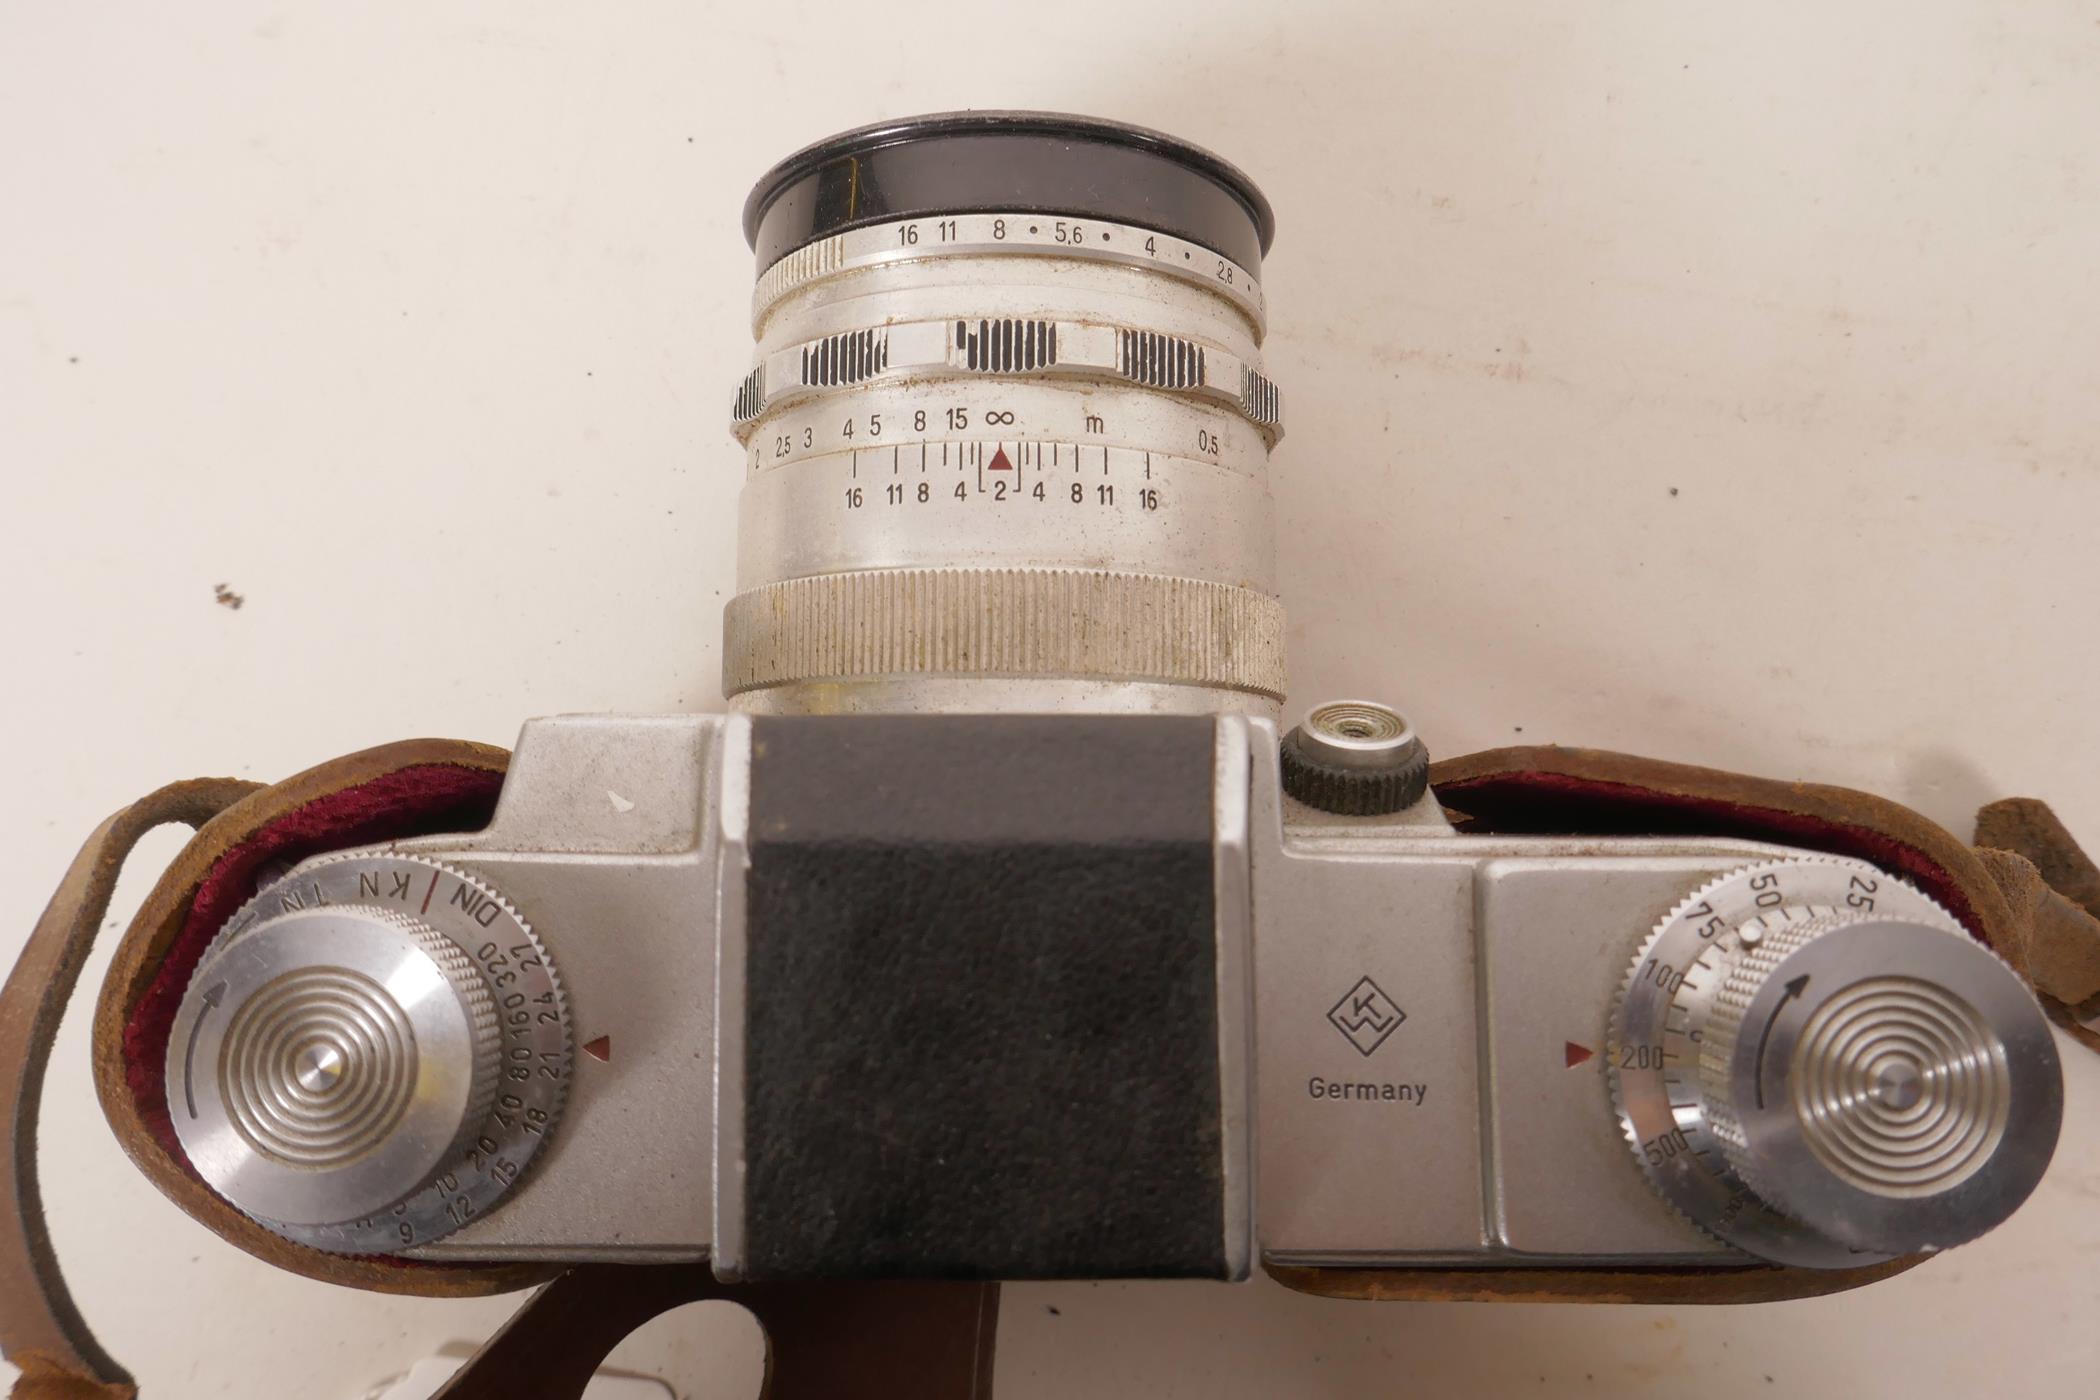 A Praktina FX 35mm SLR camera made by Kamera-Werke (KW) in Dresden, East Germany in the early 1950s, - Image 3 of 3